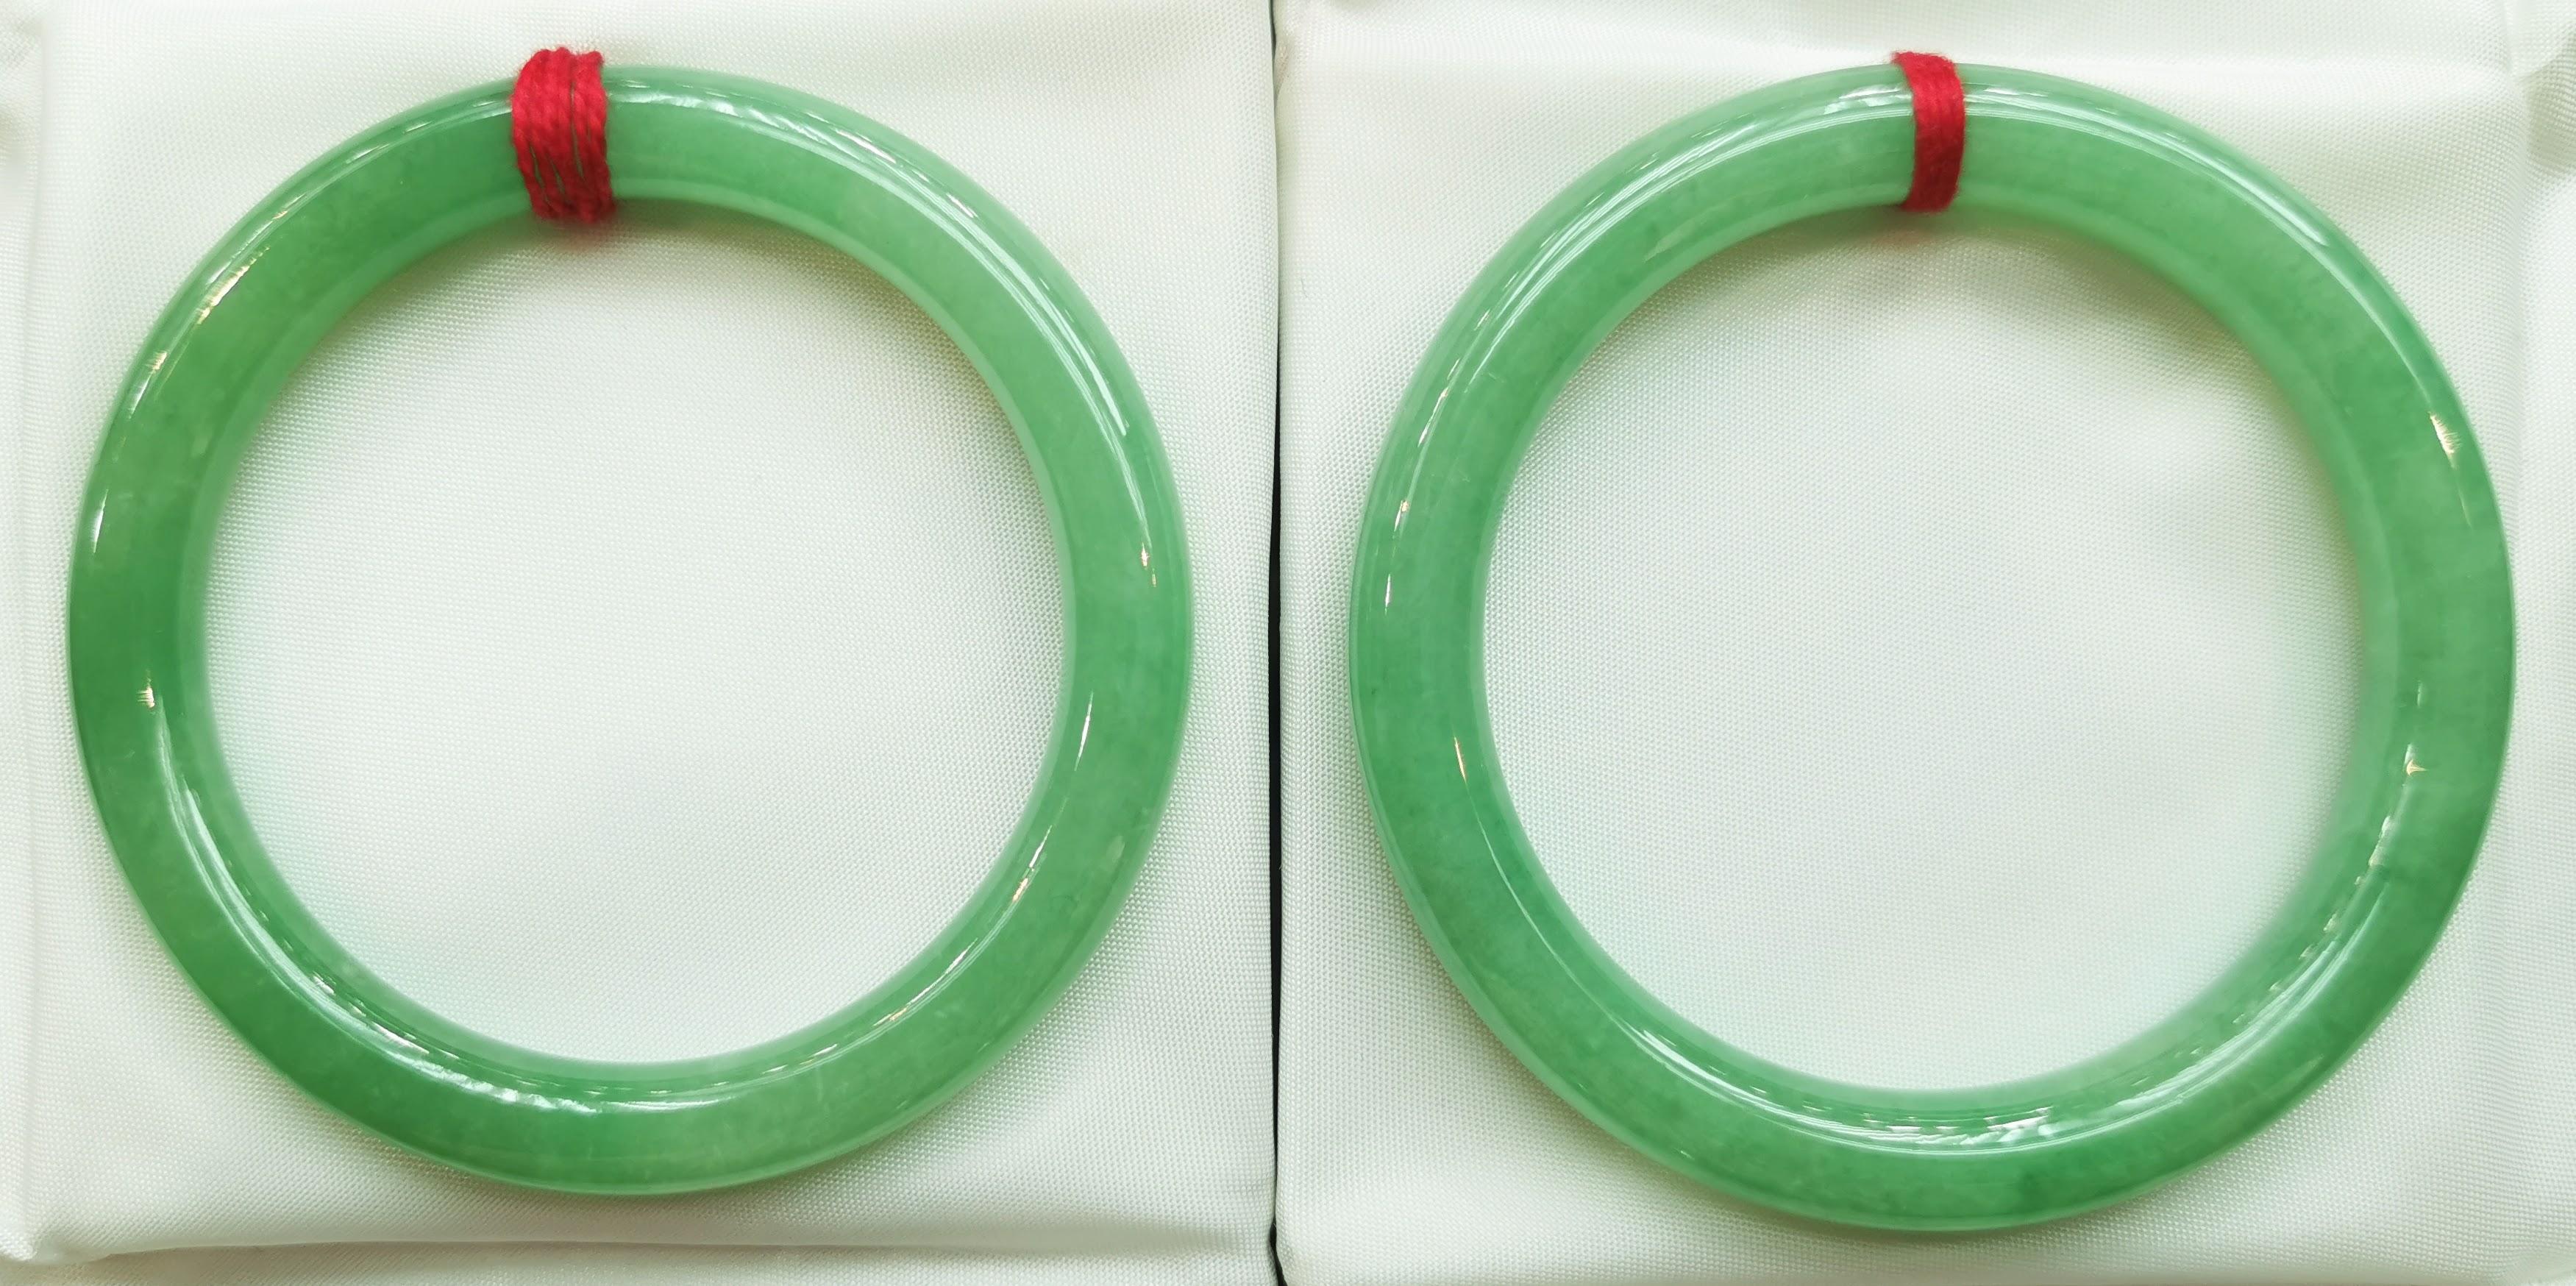 Introducing our exquisite Pair of Translucent Apple Green Jadeite Jade Bangles, a testament to the unparalleled beauty and rarity of fine jadeite craftsmanship. These bangles showcase a captivating apple green color with a translucent quality,